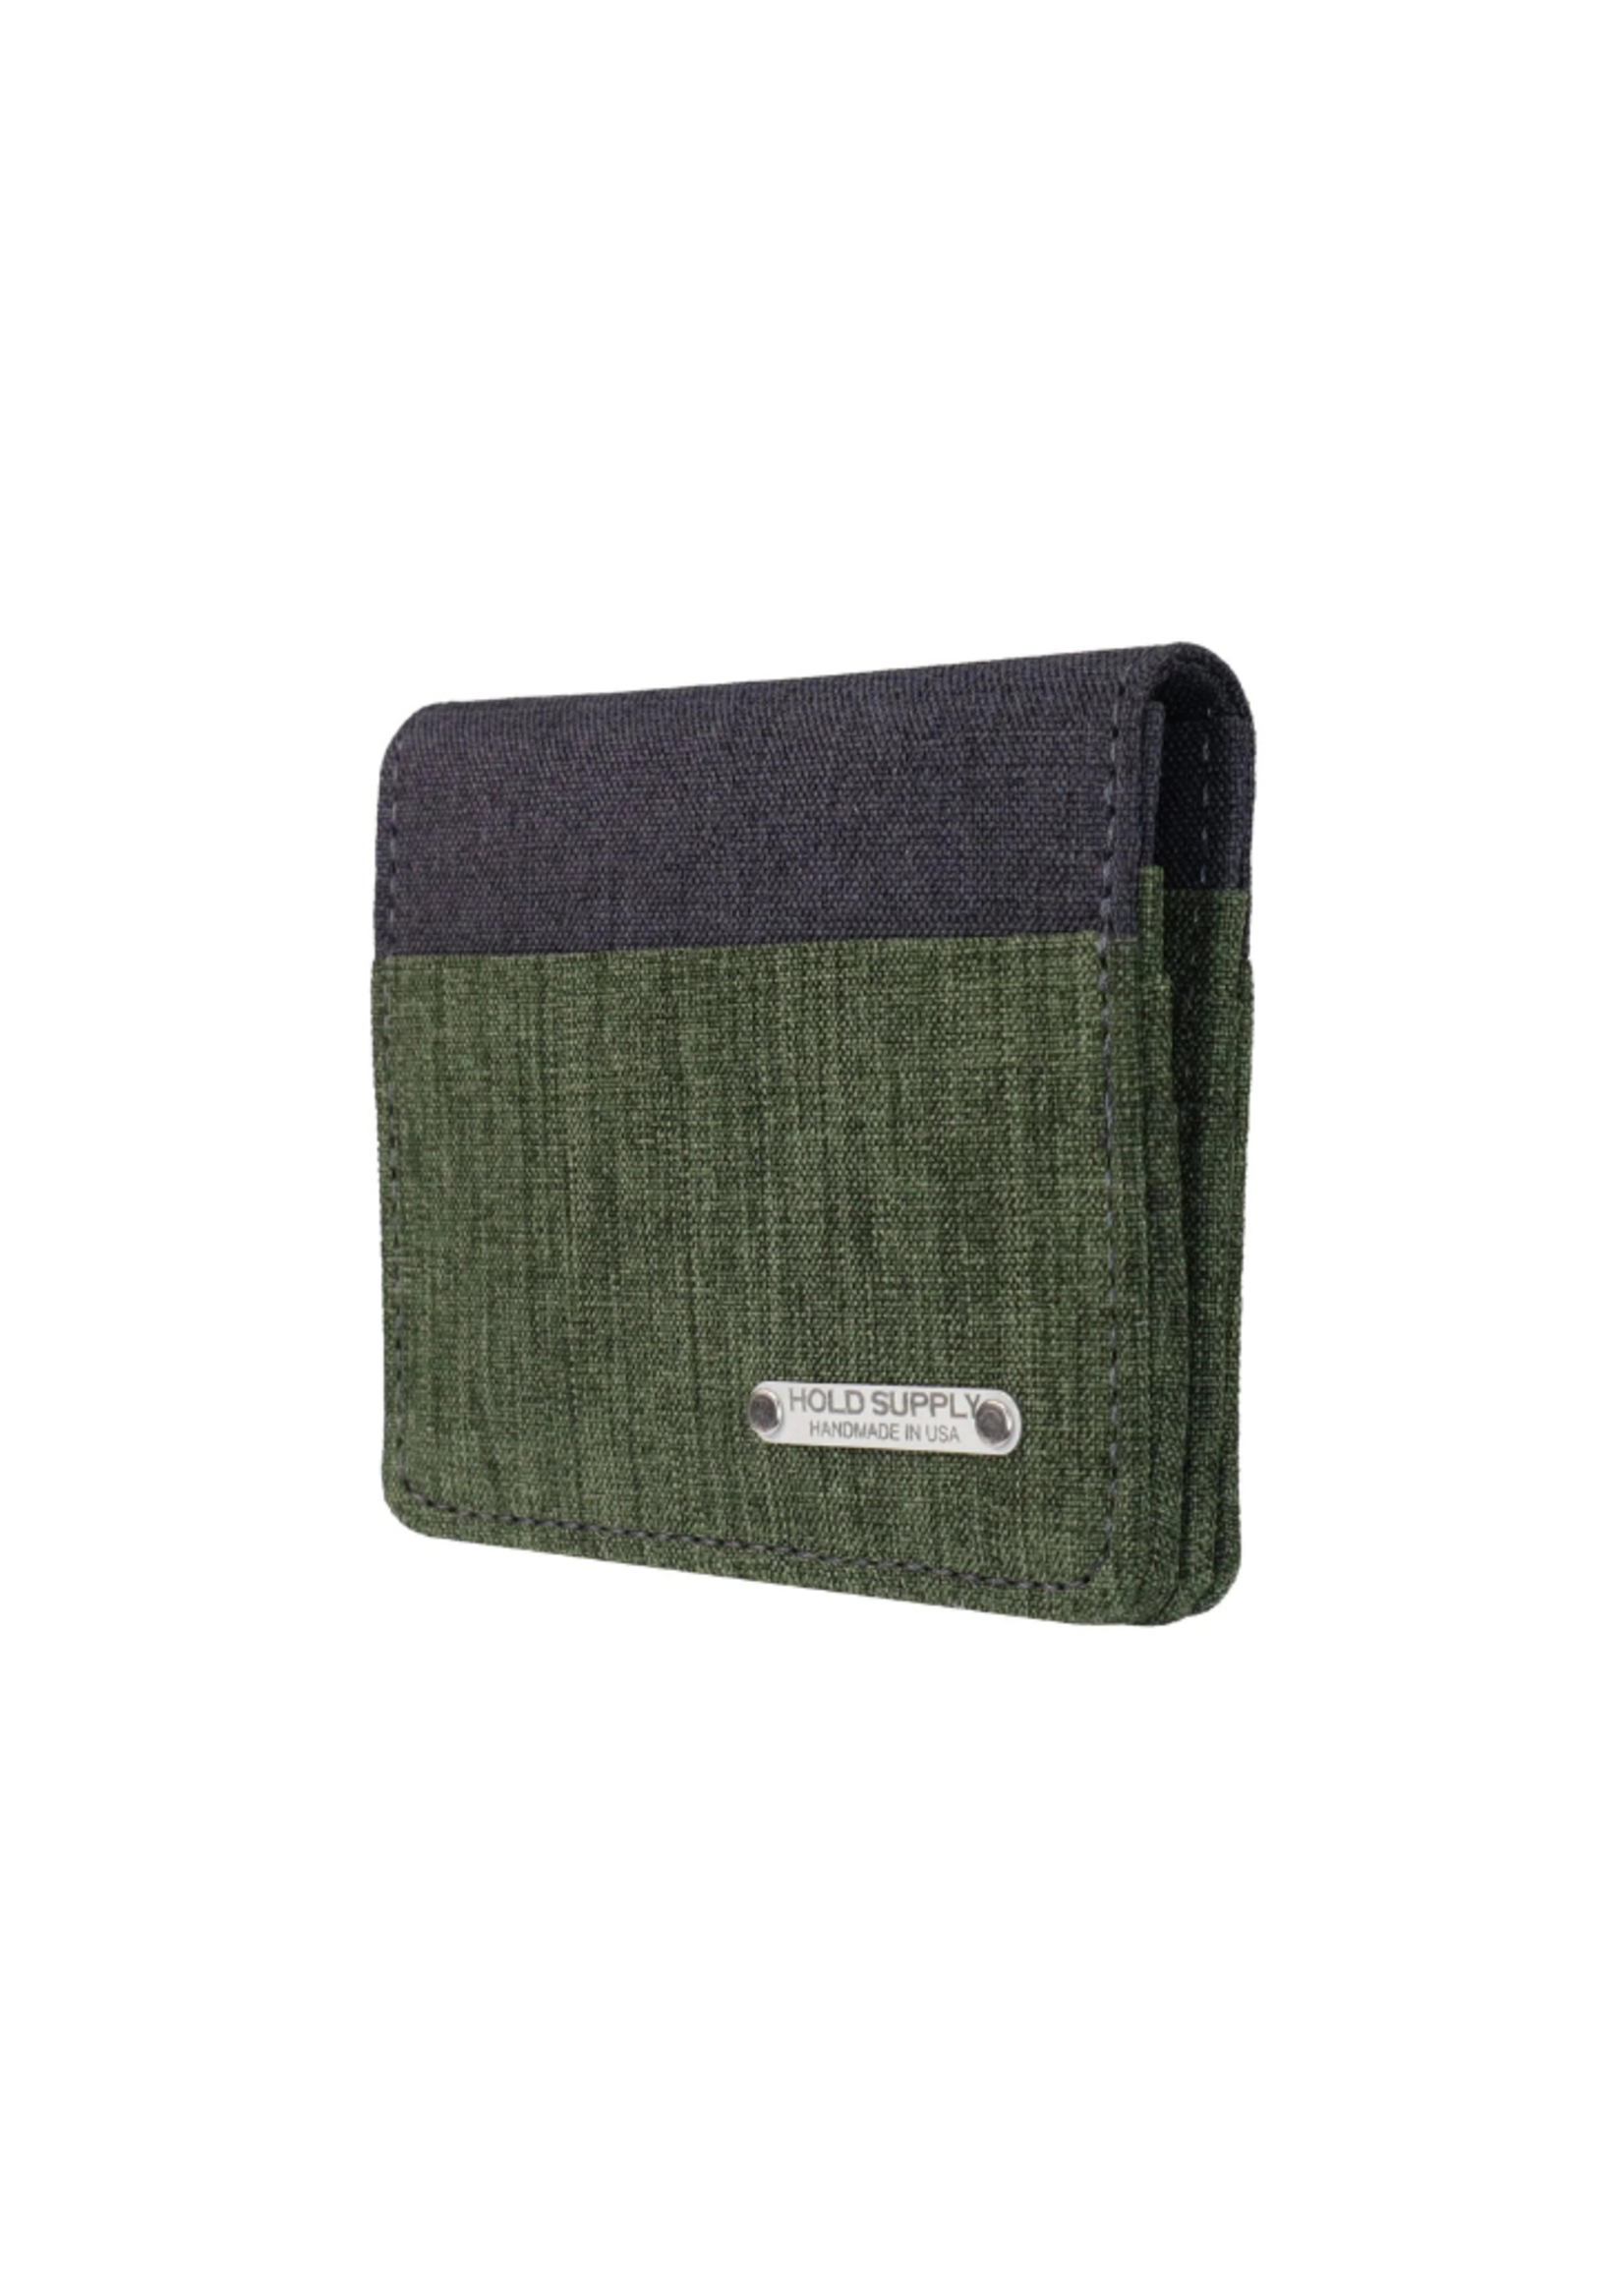 Hold Supply Co Green / Gray Canvas Vertical Bifold Card & Cash Wallet